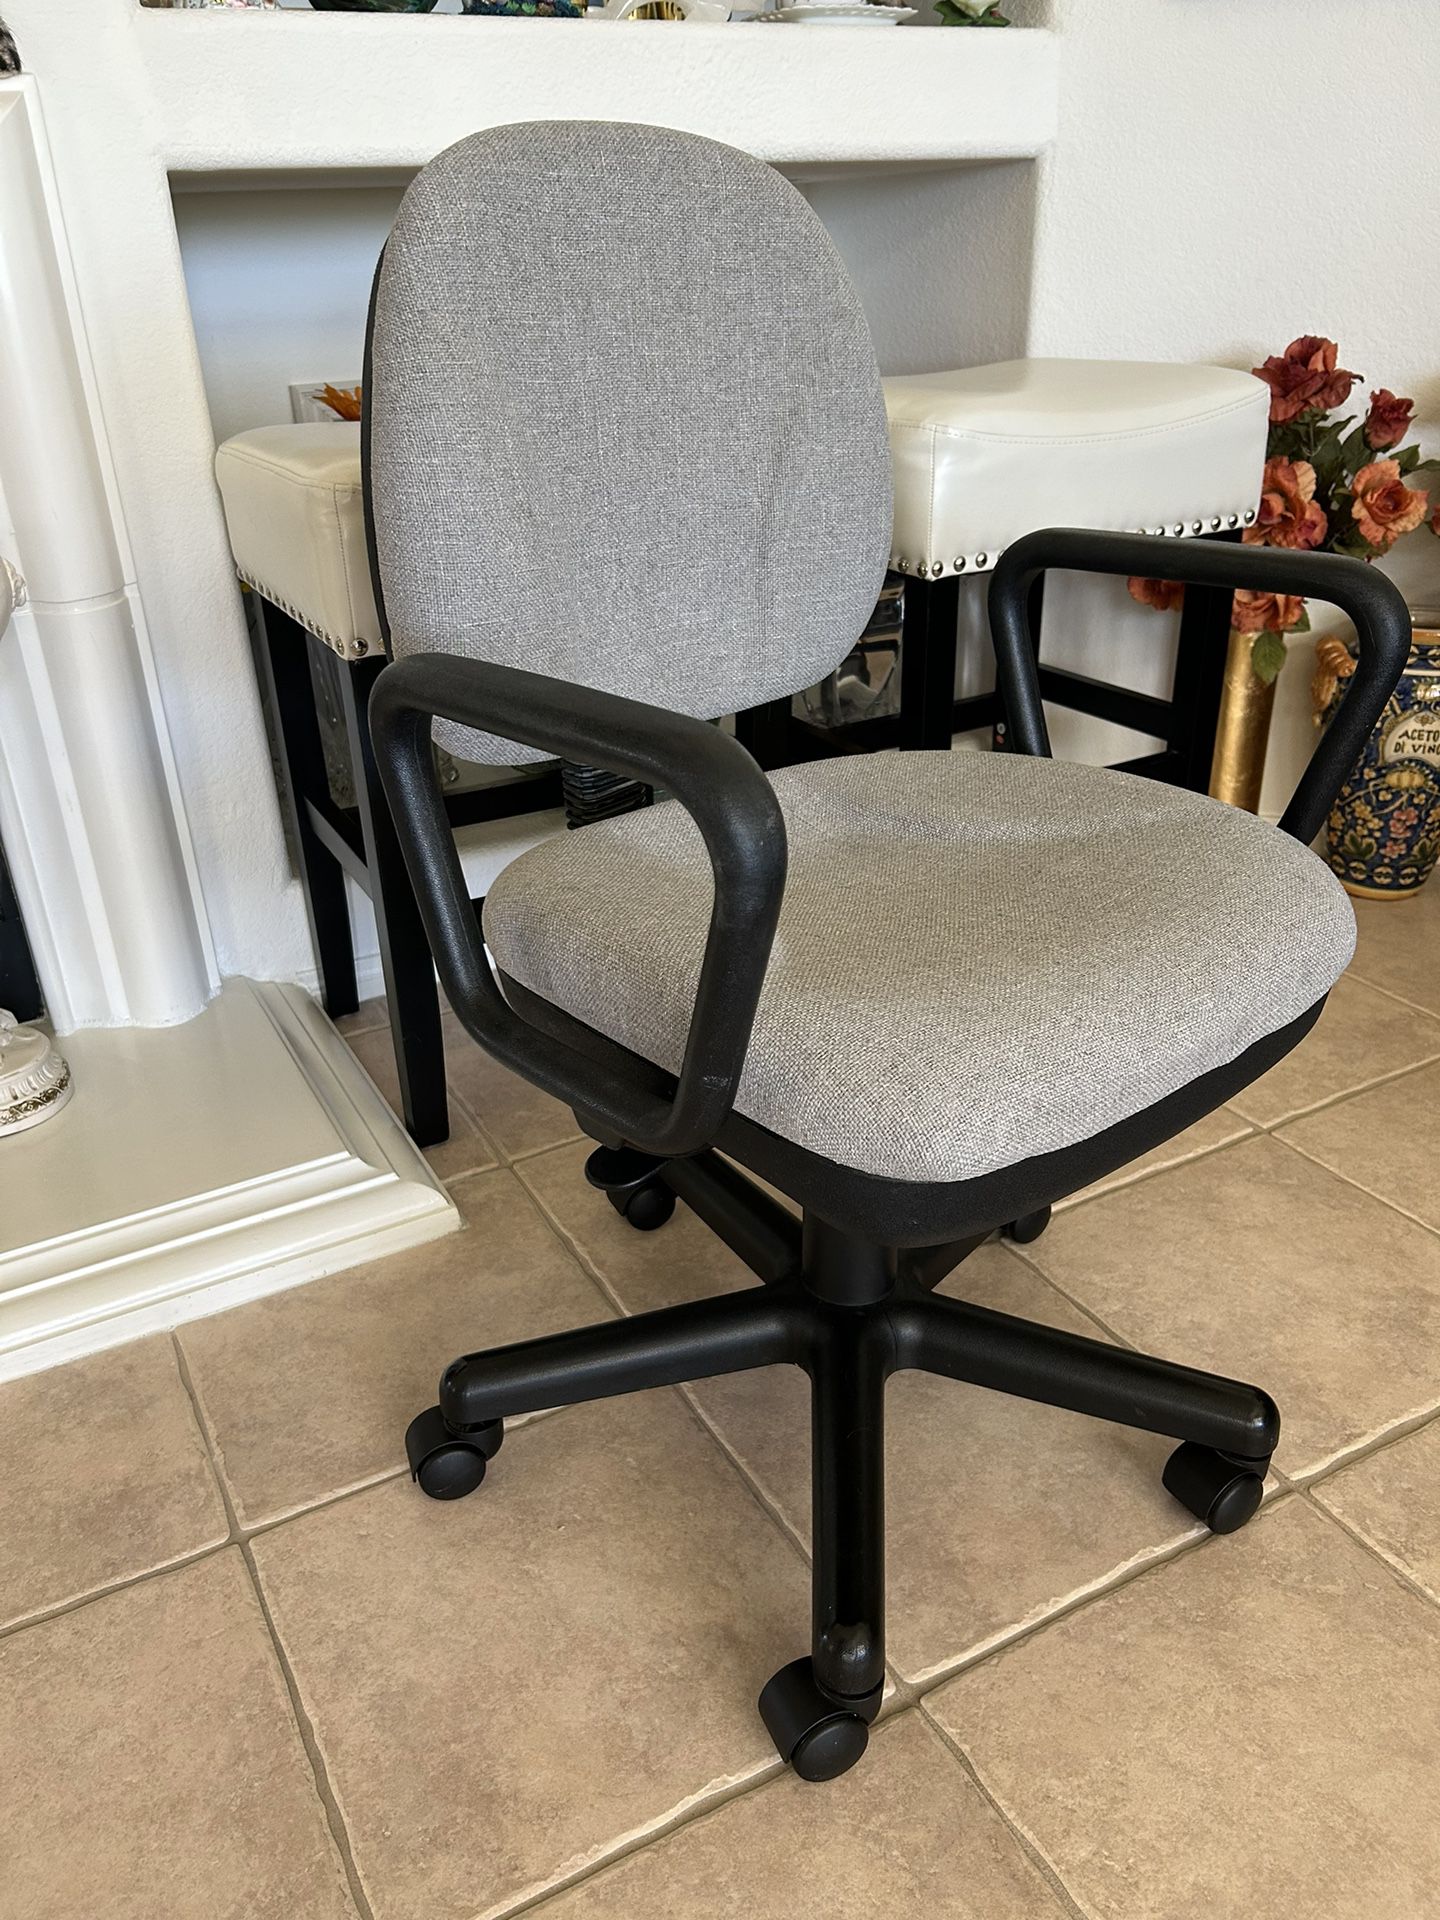 Adjustable Rolling Office / Home Chair.